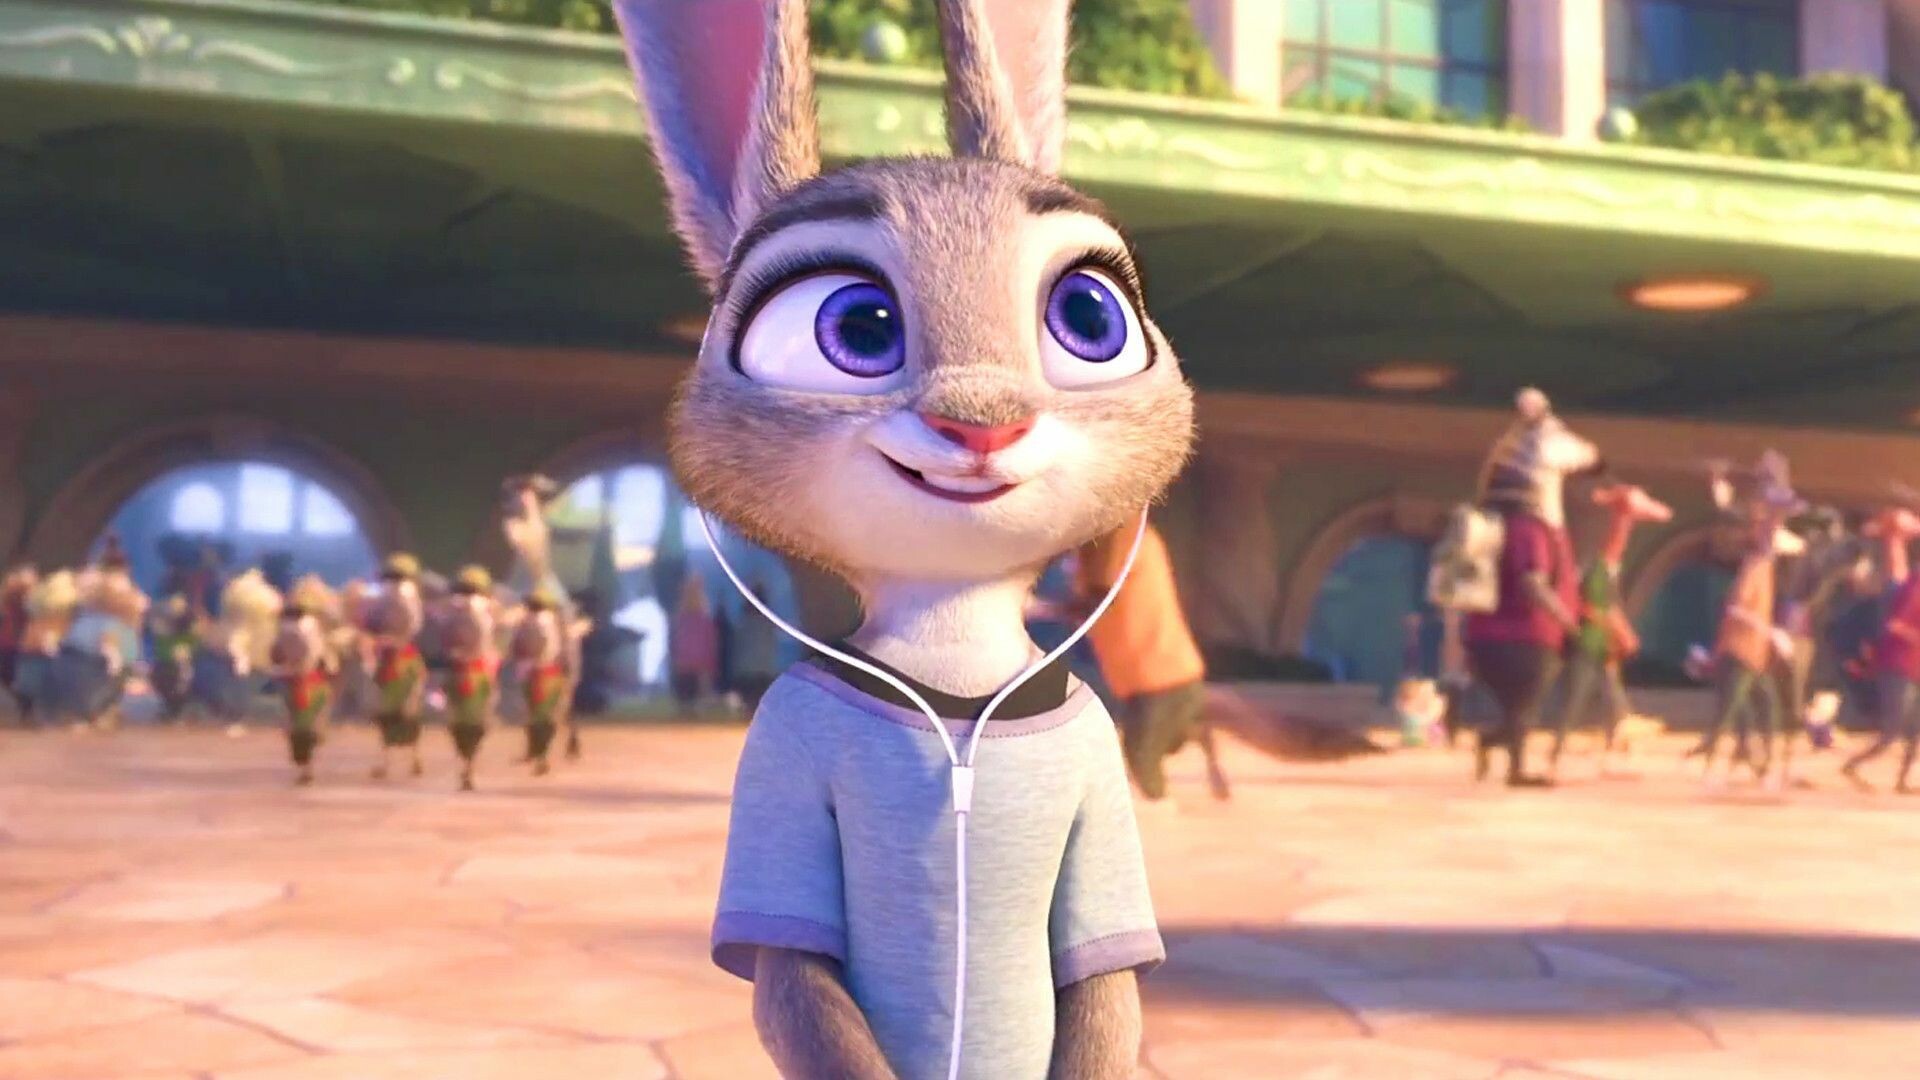 Zootopia: Officer Judith Laverne "Judy" Hopps, The daughter of Bonnie and Stu and is a member of the Hopps family. 1920x1080 Full HD Wallpaper.